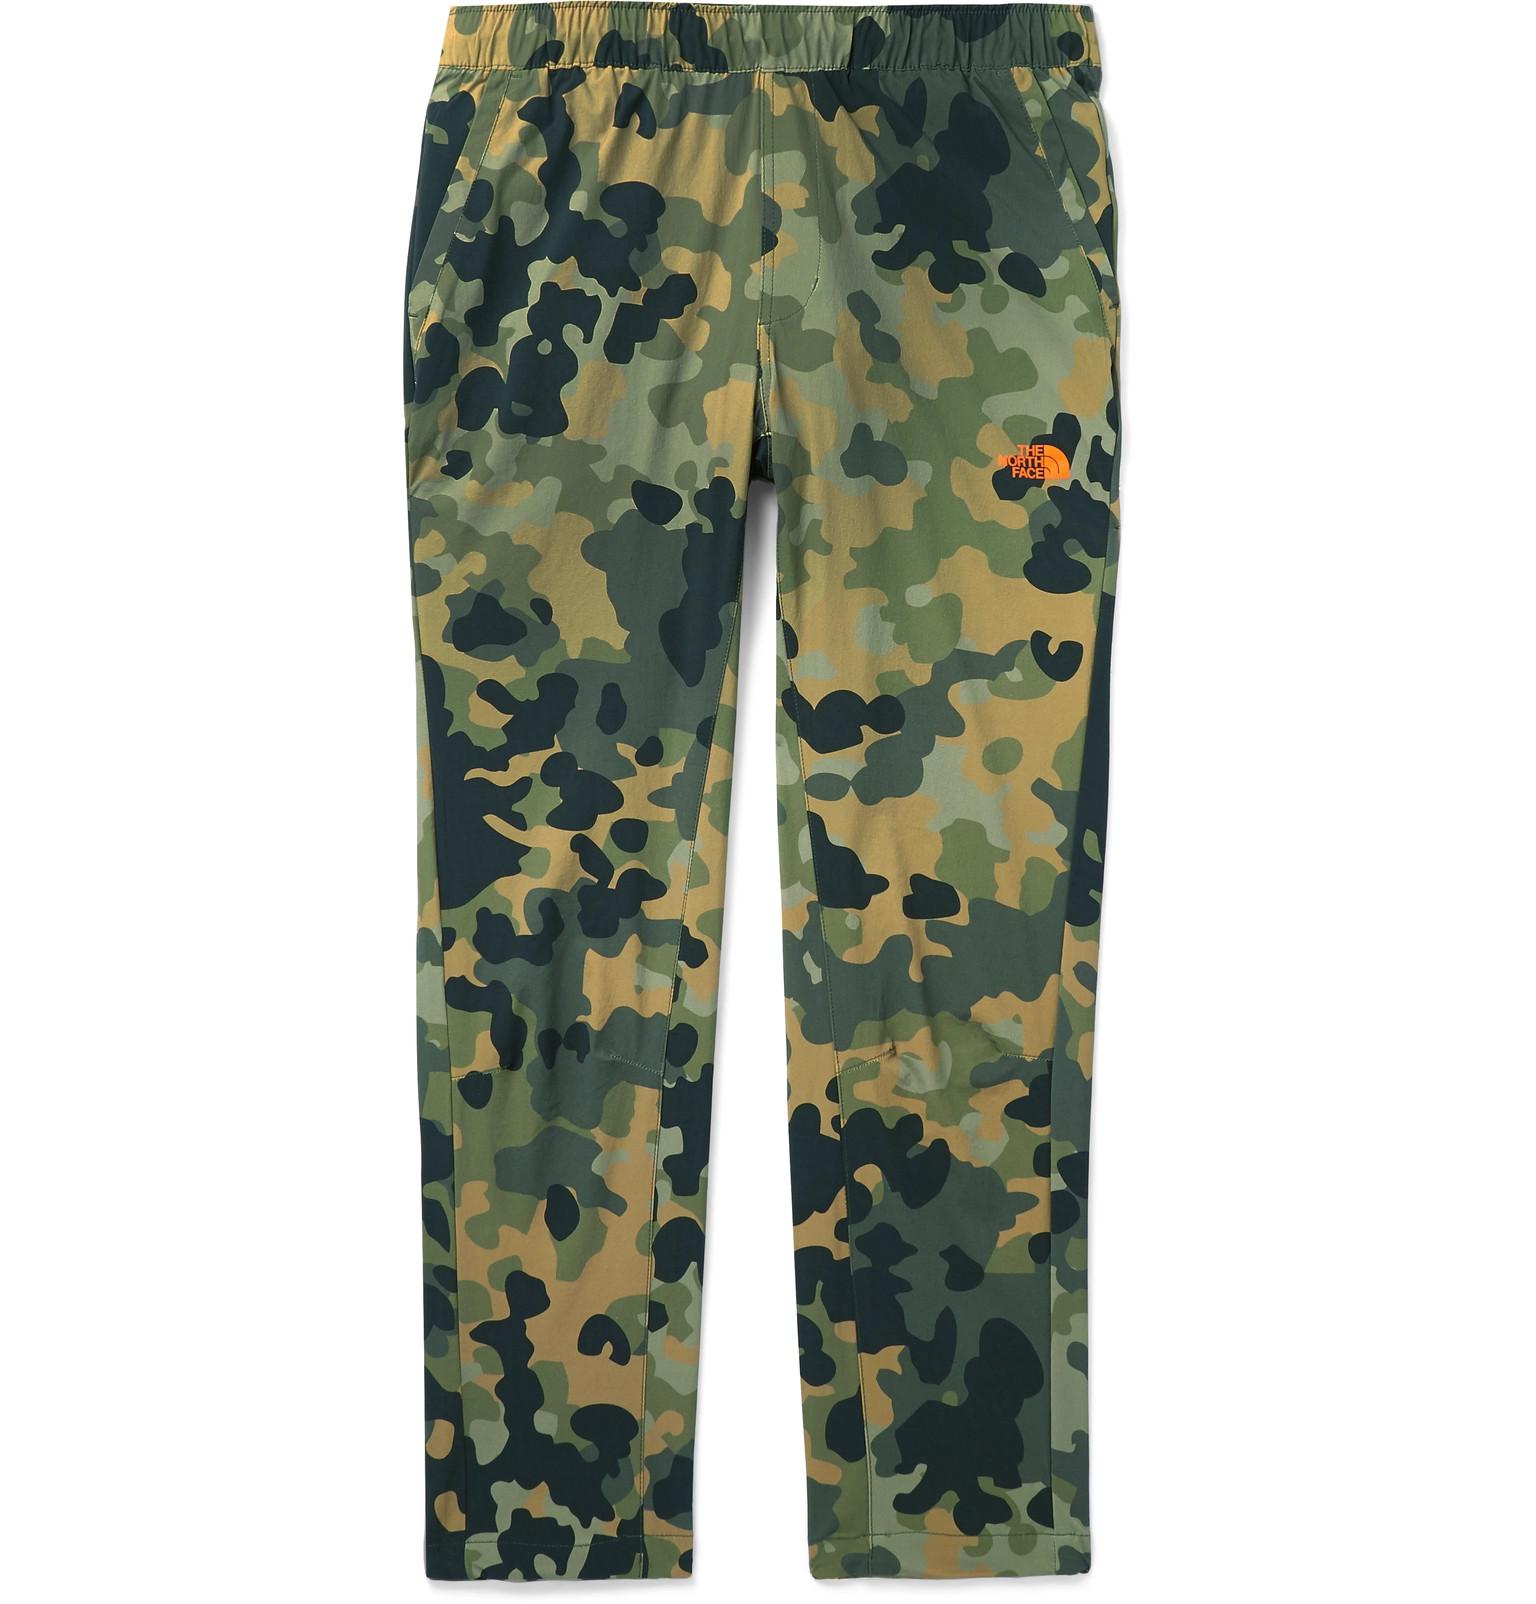 North Face Camo Trousers Clearance, SAVE 48% - www.insomniacorp.com